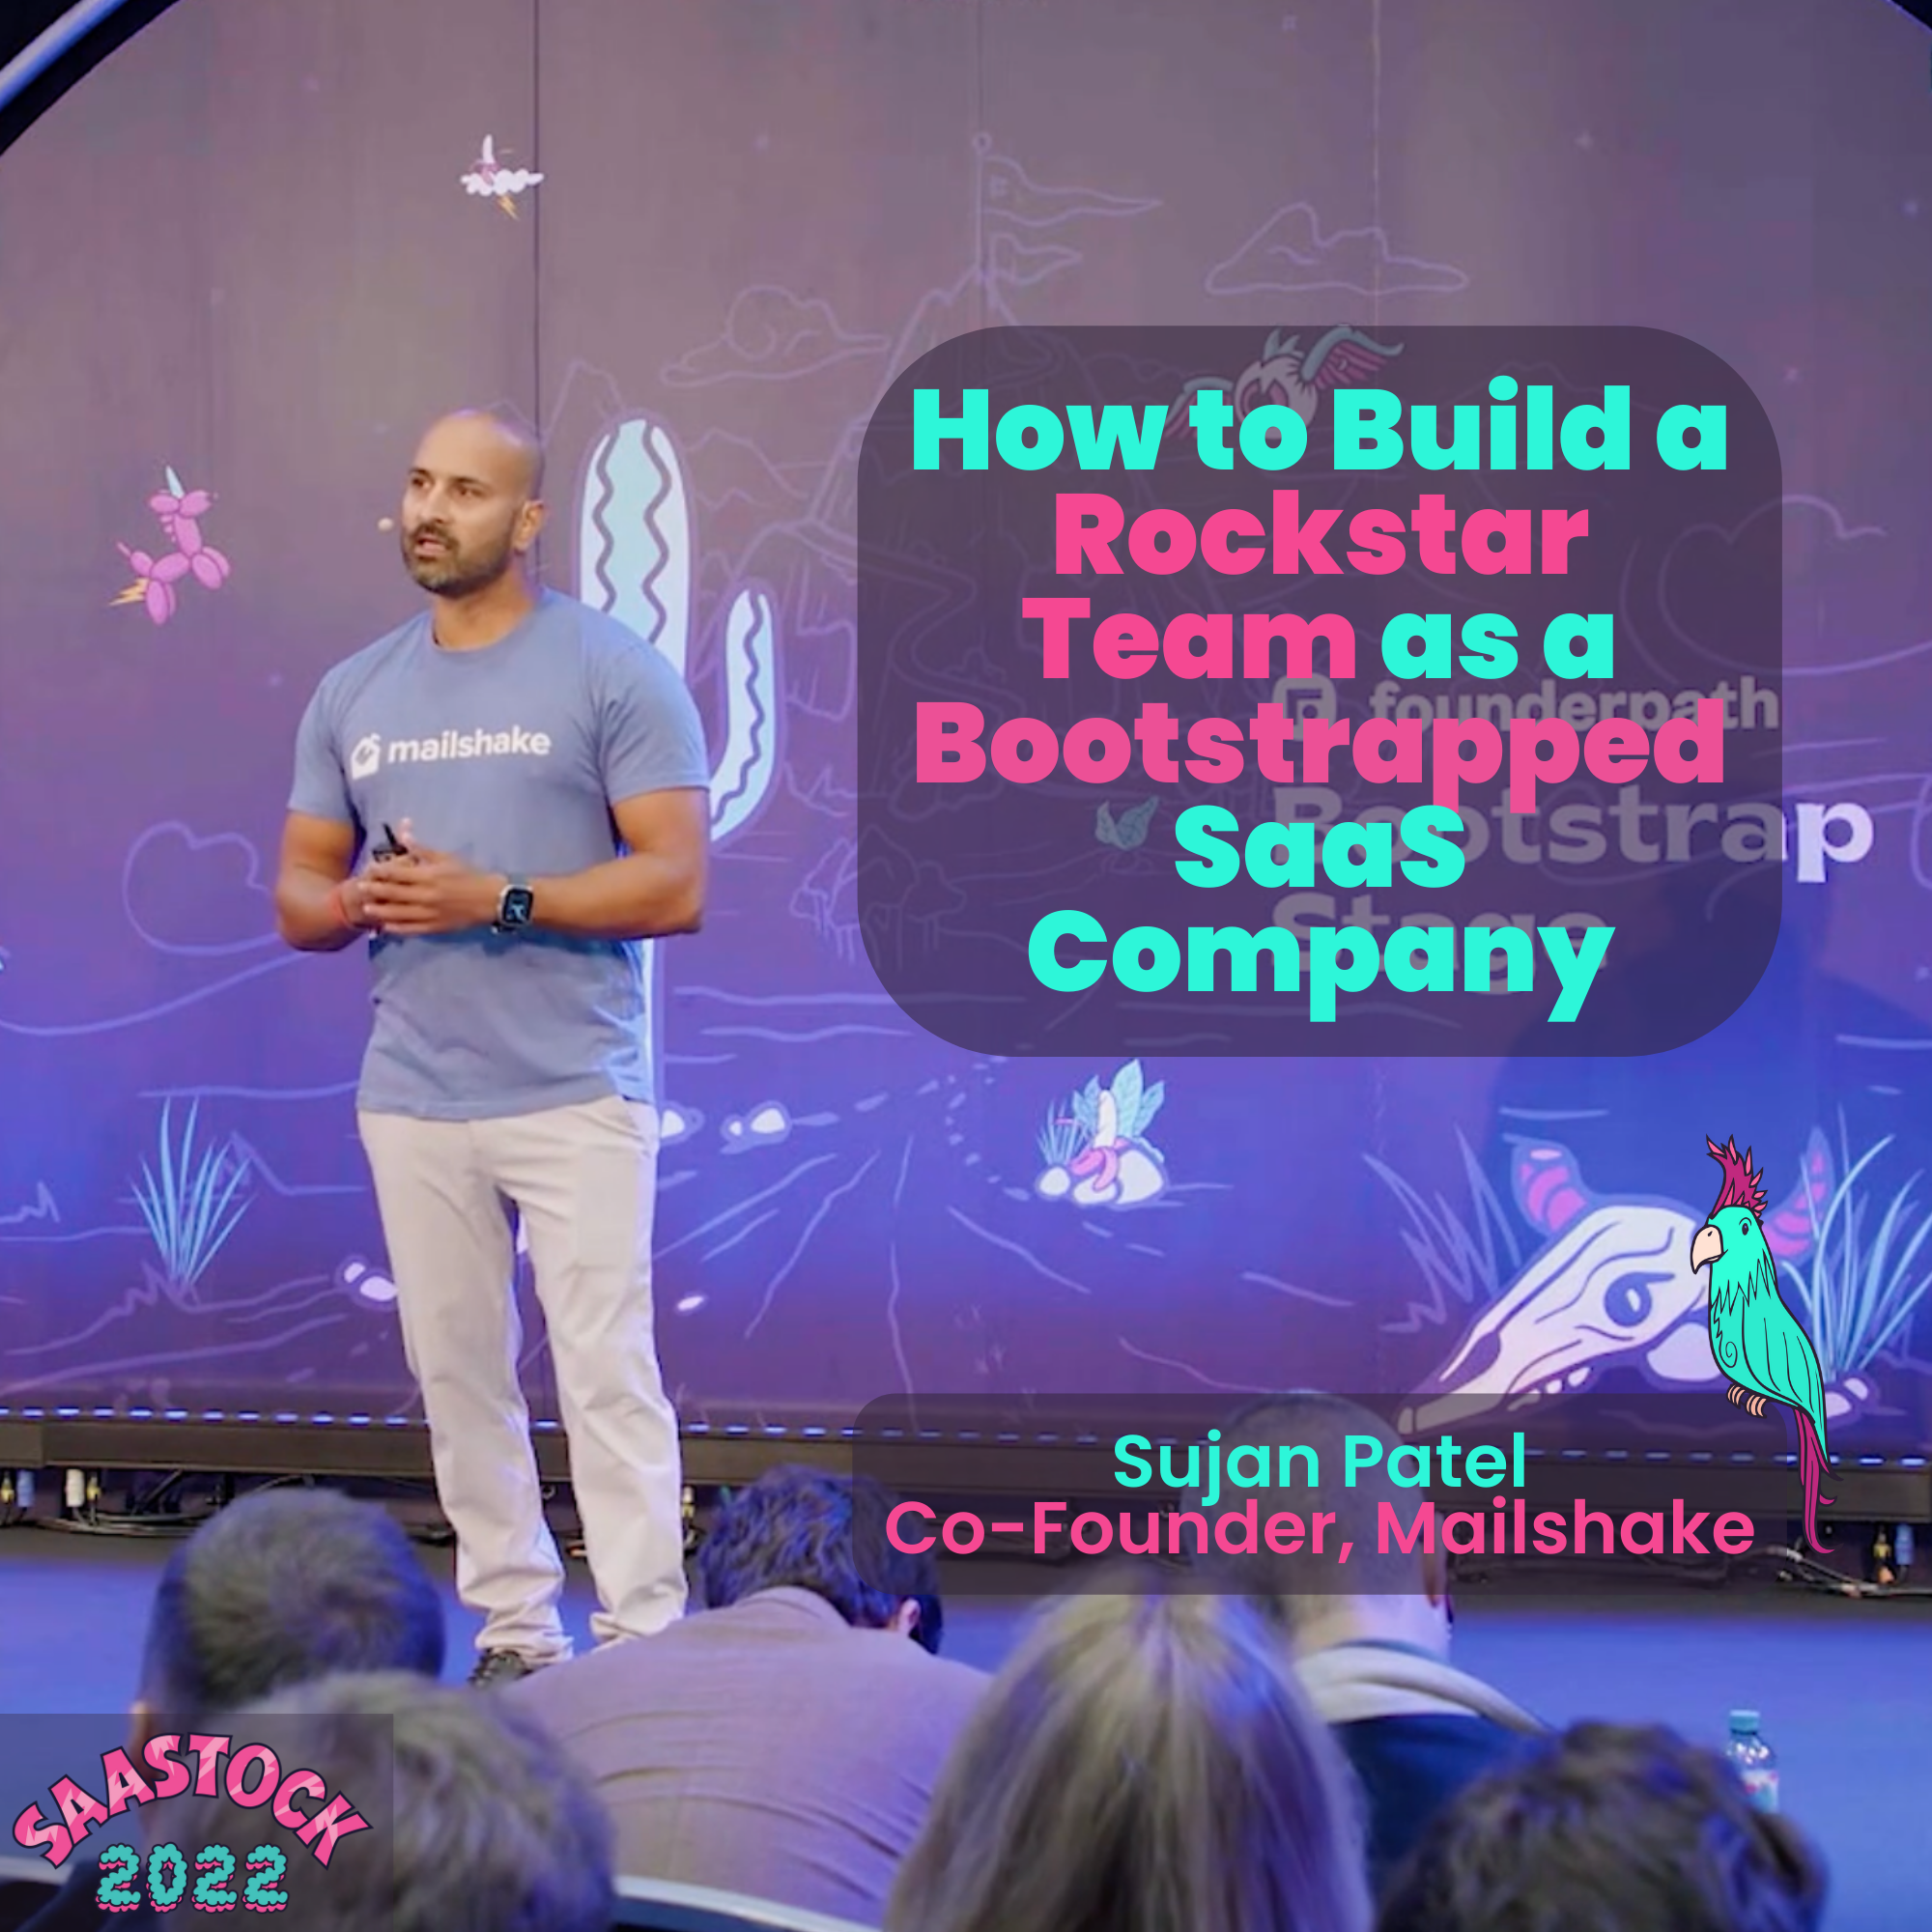 How to Build a Rockstar Team as a Bootstrapped SaaS Company